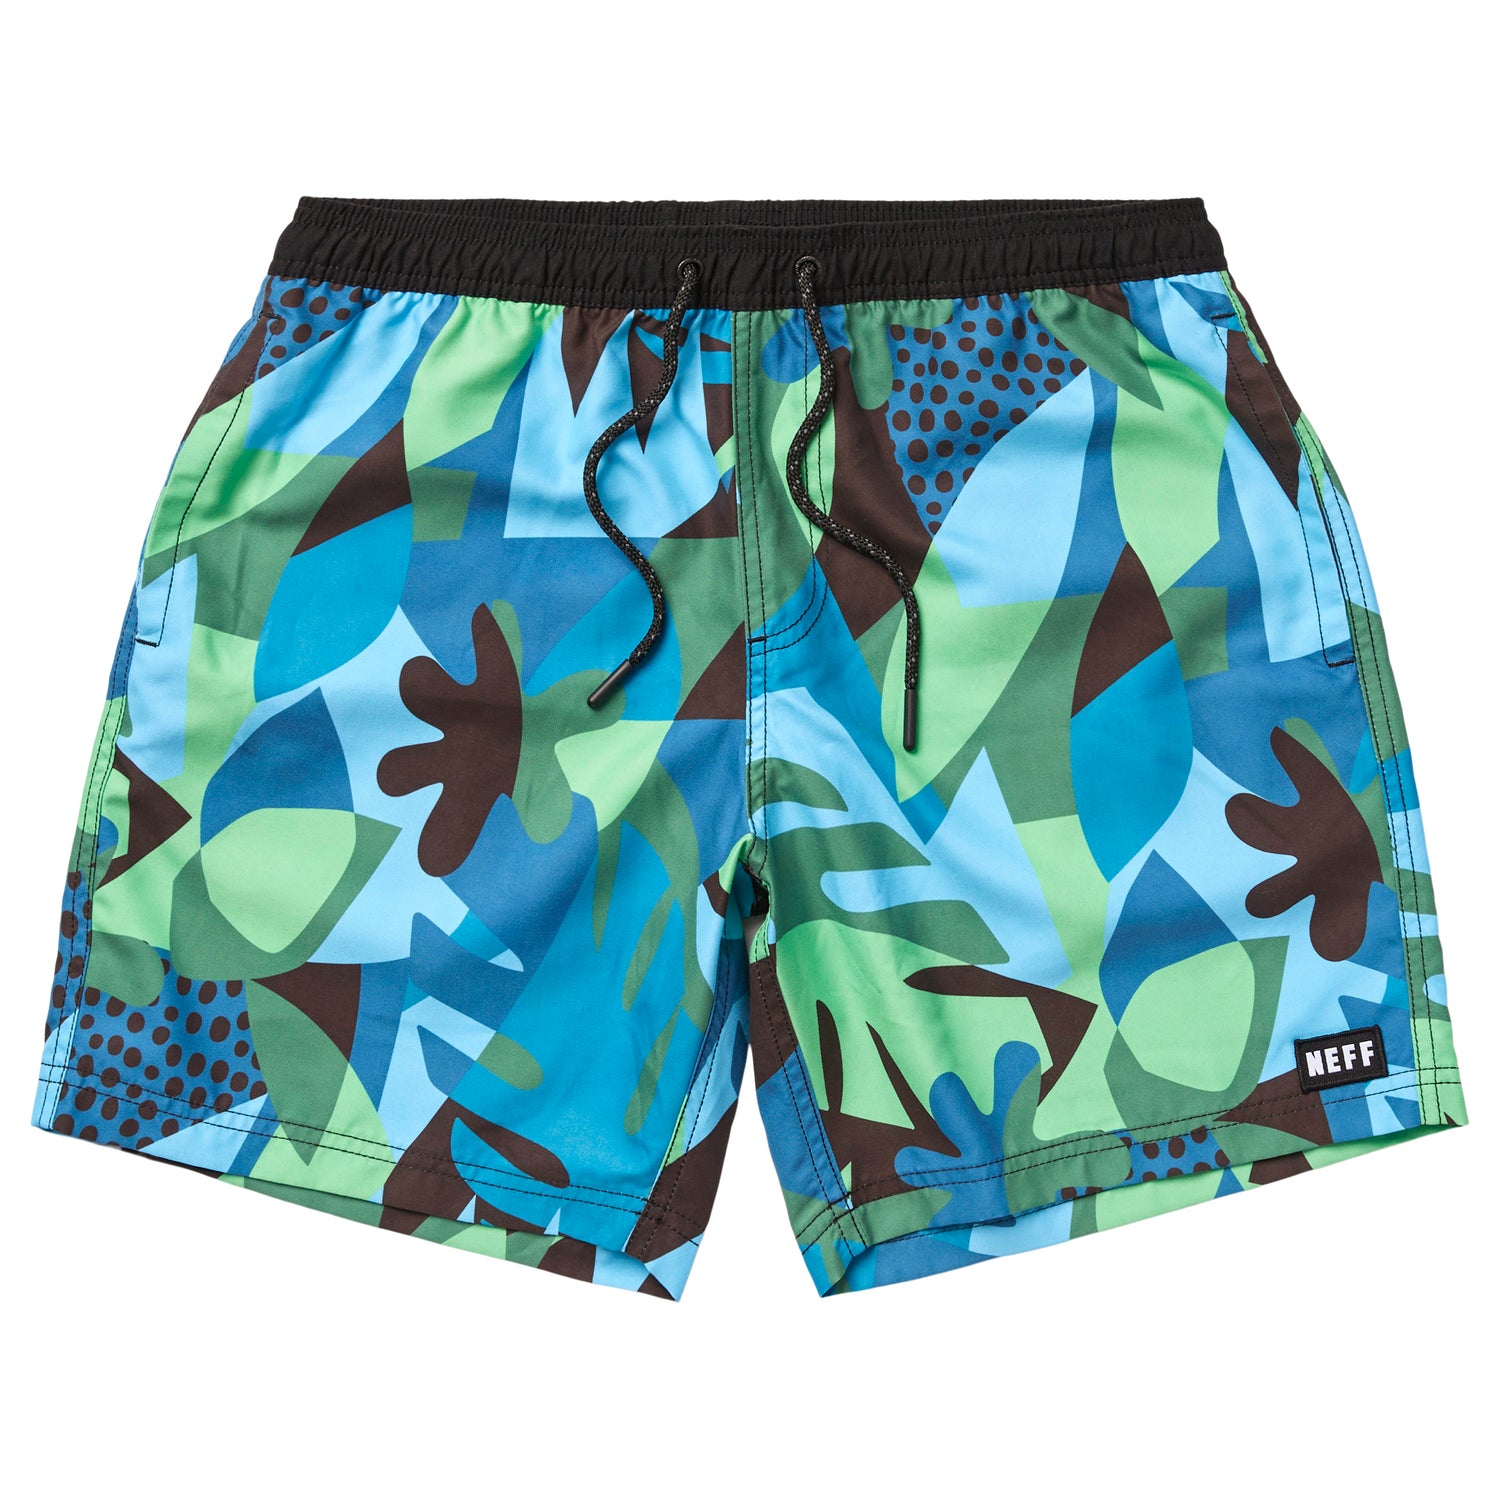 JEFFERSON 17" HOT TUB VOLLEY SHORTS - BLUE